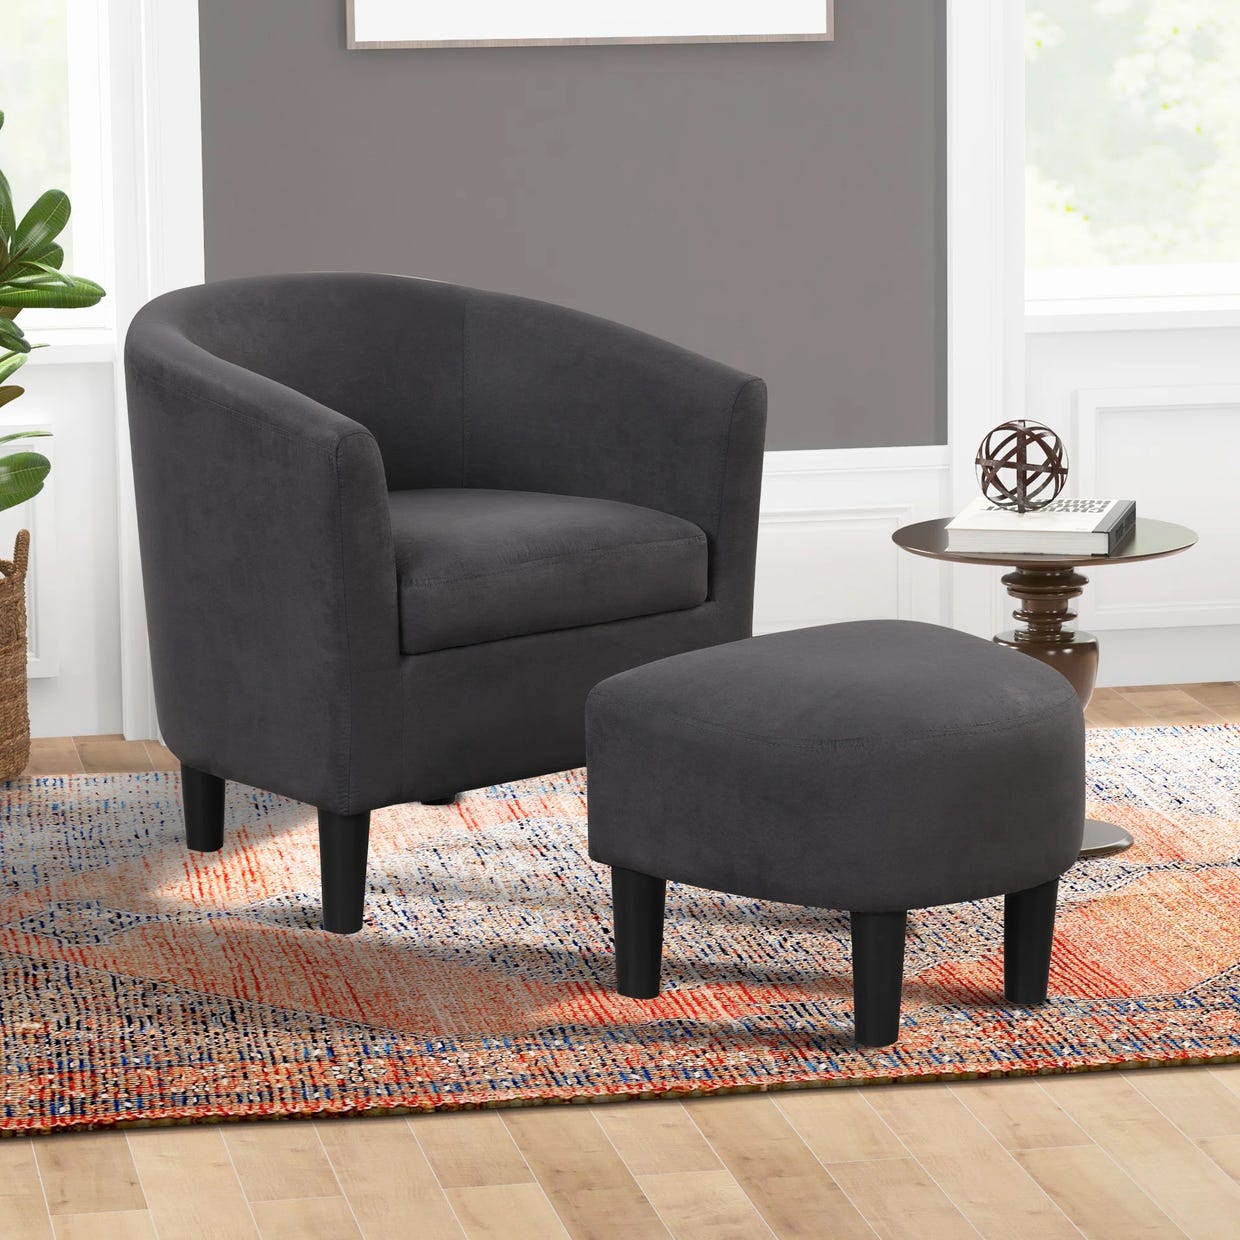 A dark grey upholstered armchair with a matching ottoman, set on a multicolored area rug beside a round side table with a decorative object.